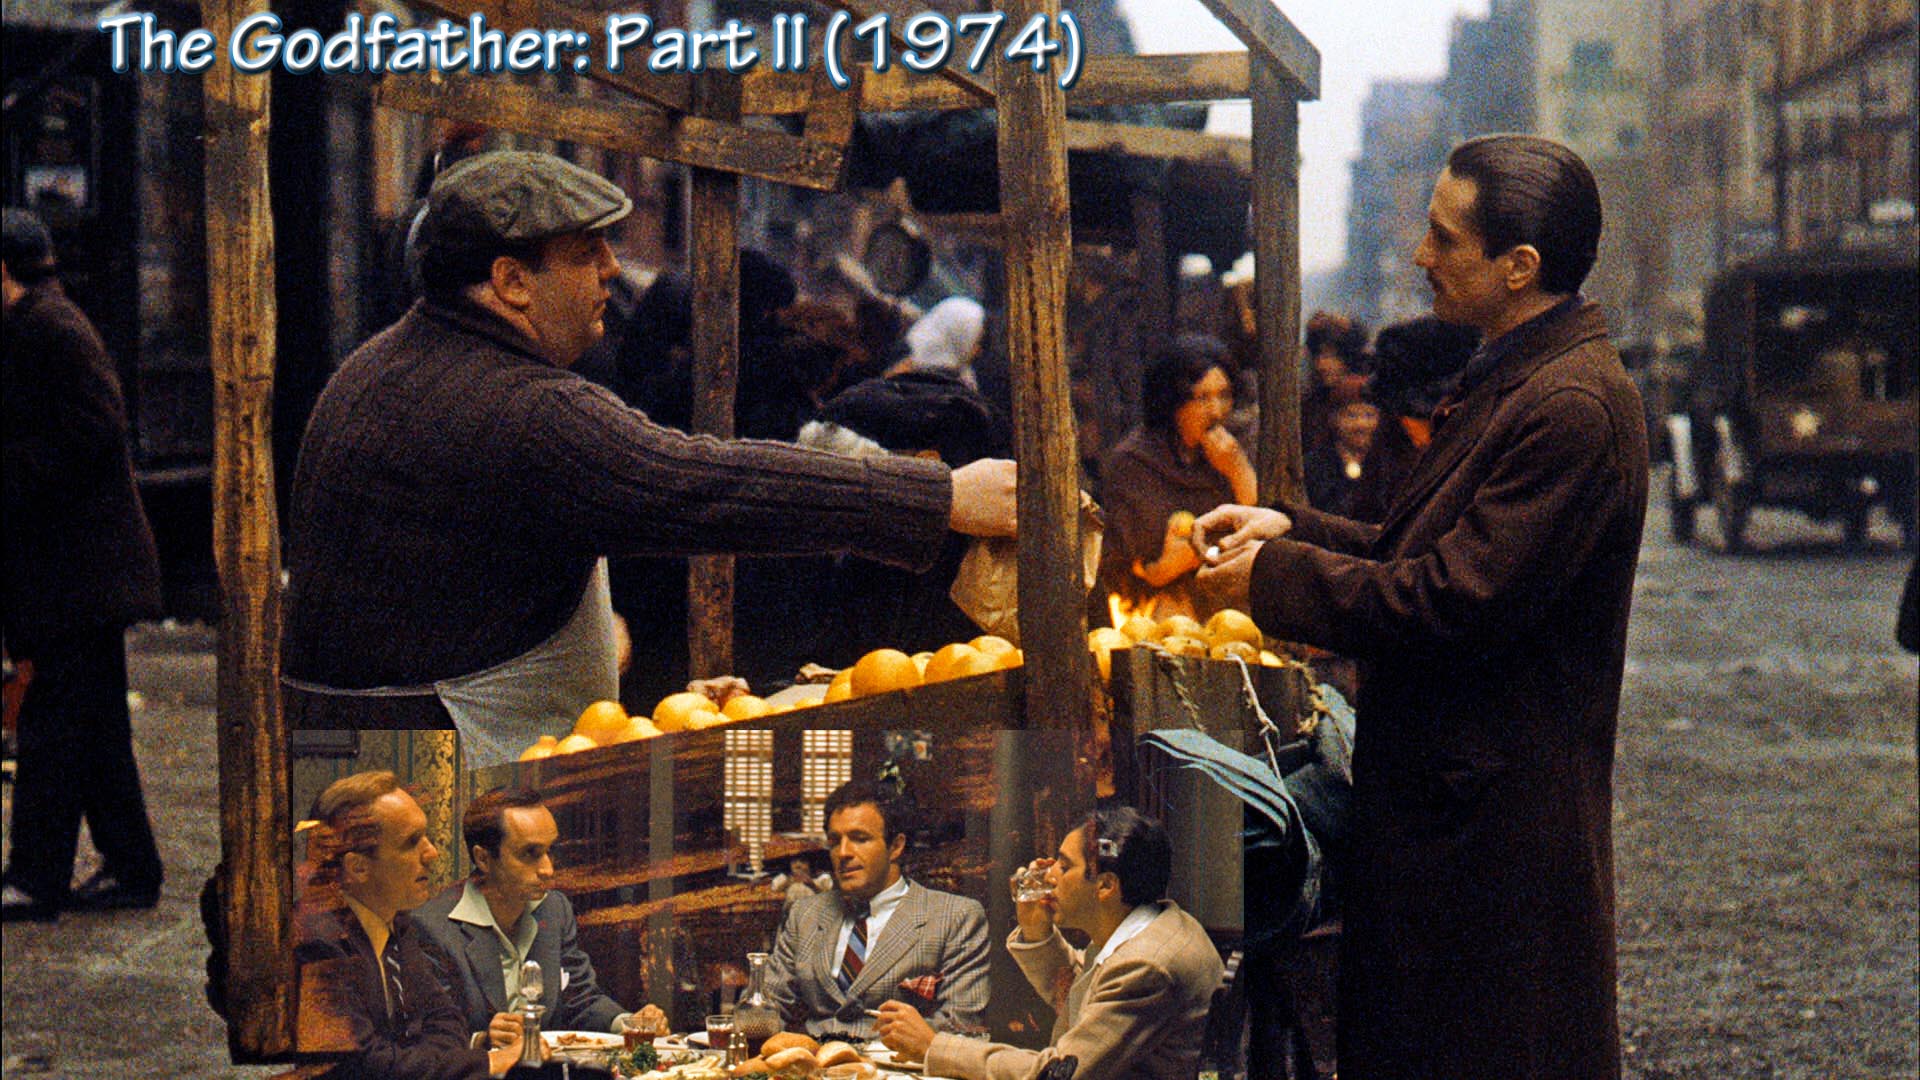 The Godfather: Part II 1974 - Classic Movies Wallpaper (34307087 ...